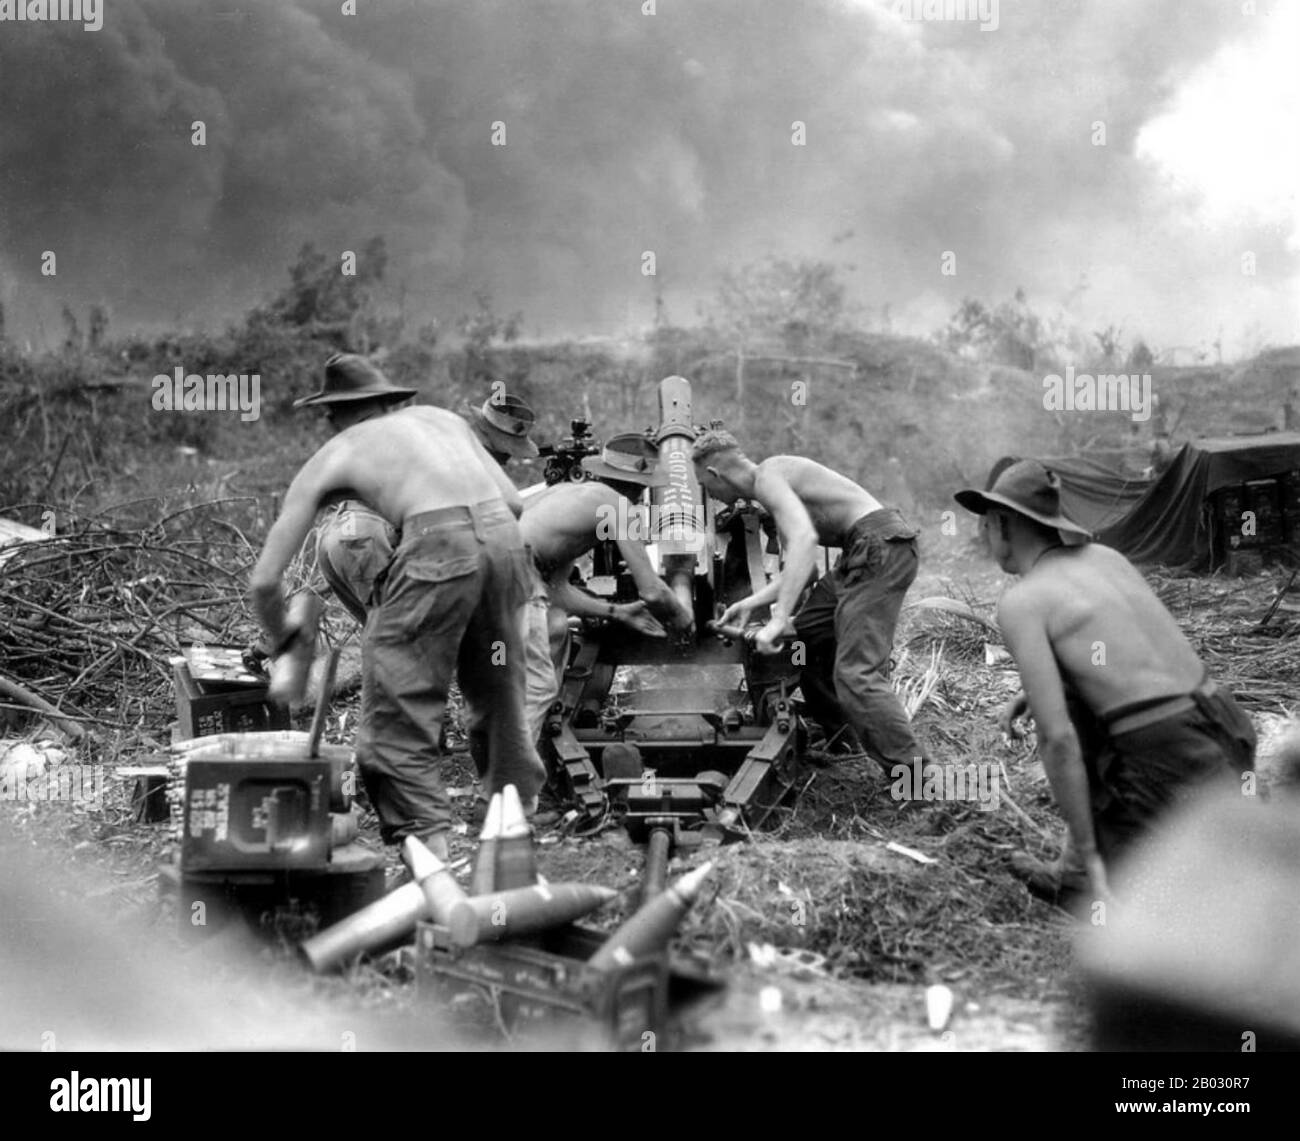 The Battle of Balikpapan was the concluding stage of Operation Oboe. The landings took place on 1 July 1945. The Australian 7th Division, composed of the 18th, 21st and 25th Infantry Brigades, with Dutch East Indies troops, made an amphibious landing a few miles north of Balikpapan, on the island of Borneo. The landing had been preceded by heavy bombing and shelling by Australian and US air and naval forces. The Japanese were outnumbered and outgunned, but like the other battles of the Pacific War, many of them fought to the death.  Major operations had ceased by July 21. The 7th Division's ca Stock Photo